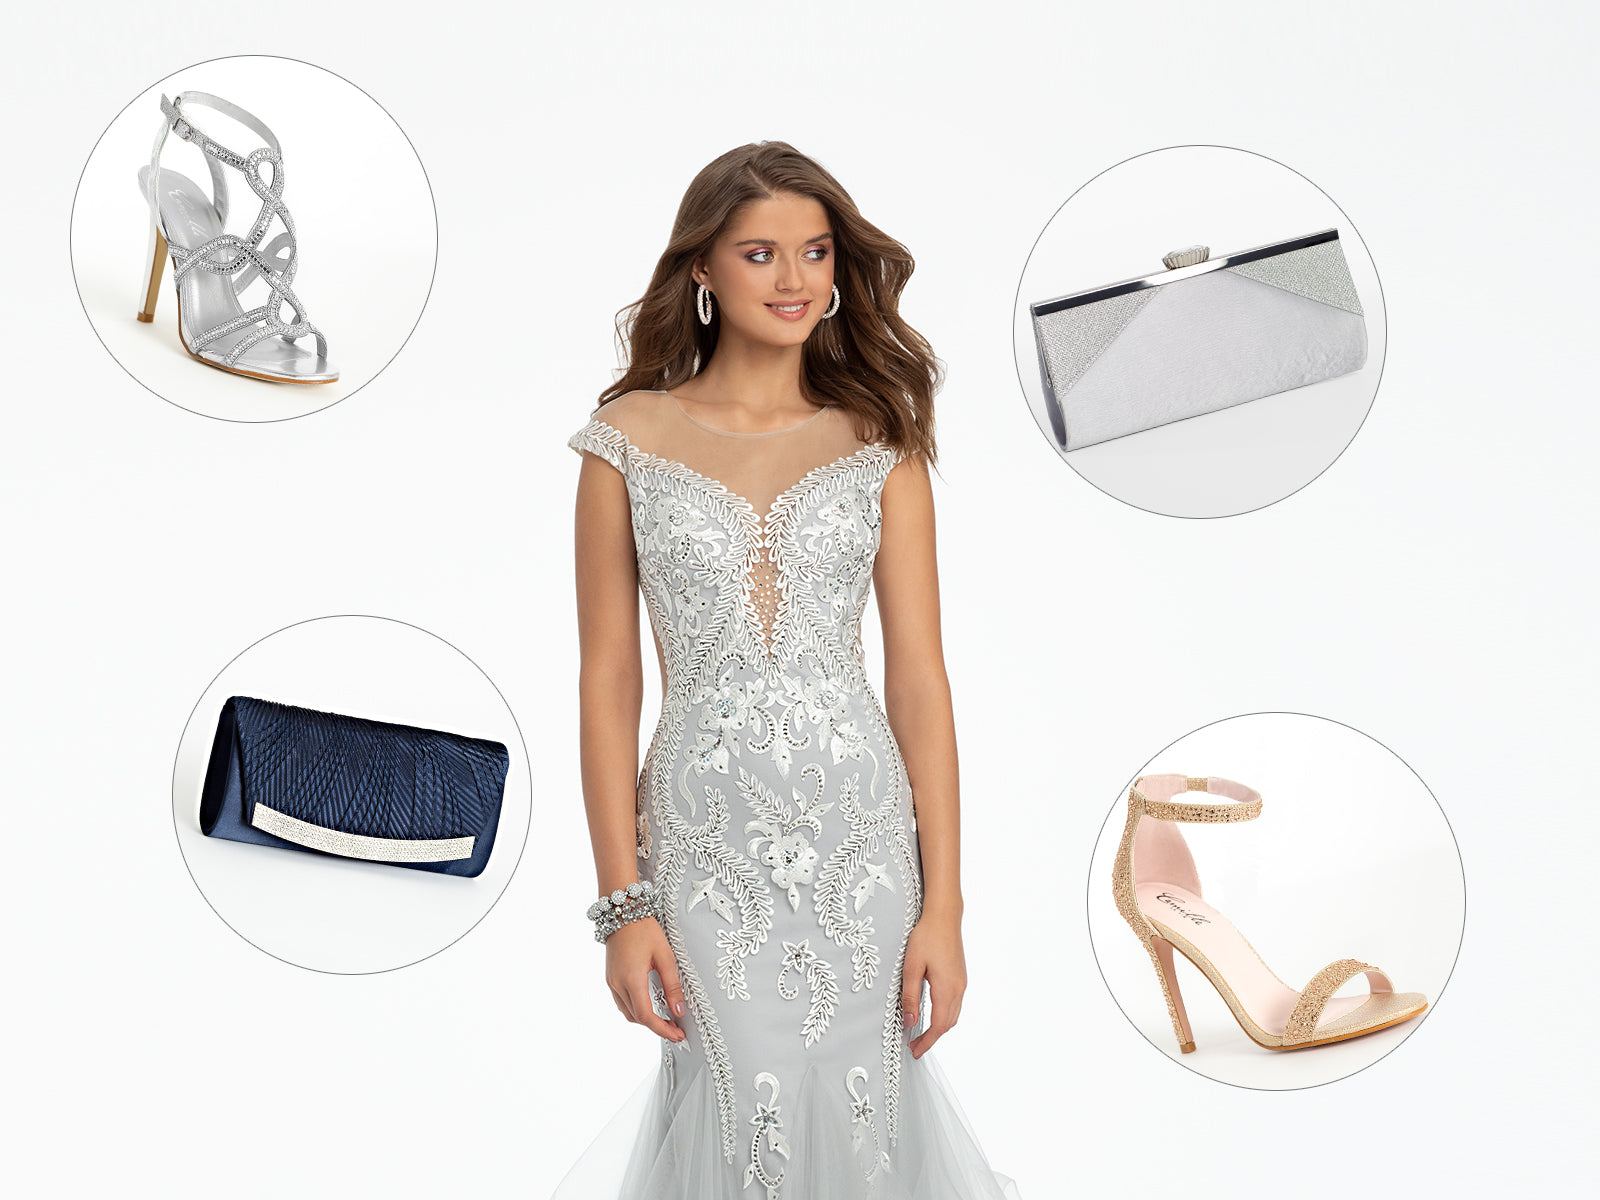 Prom Outfits & Accessories, '24 Prom Gowns, Clutches, Shoes